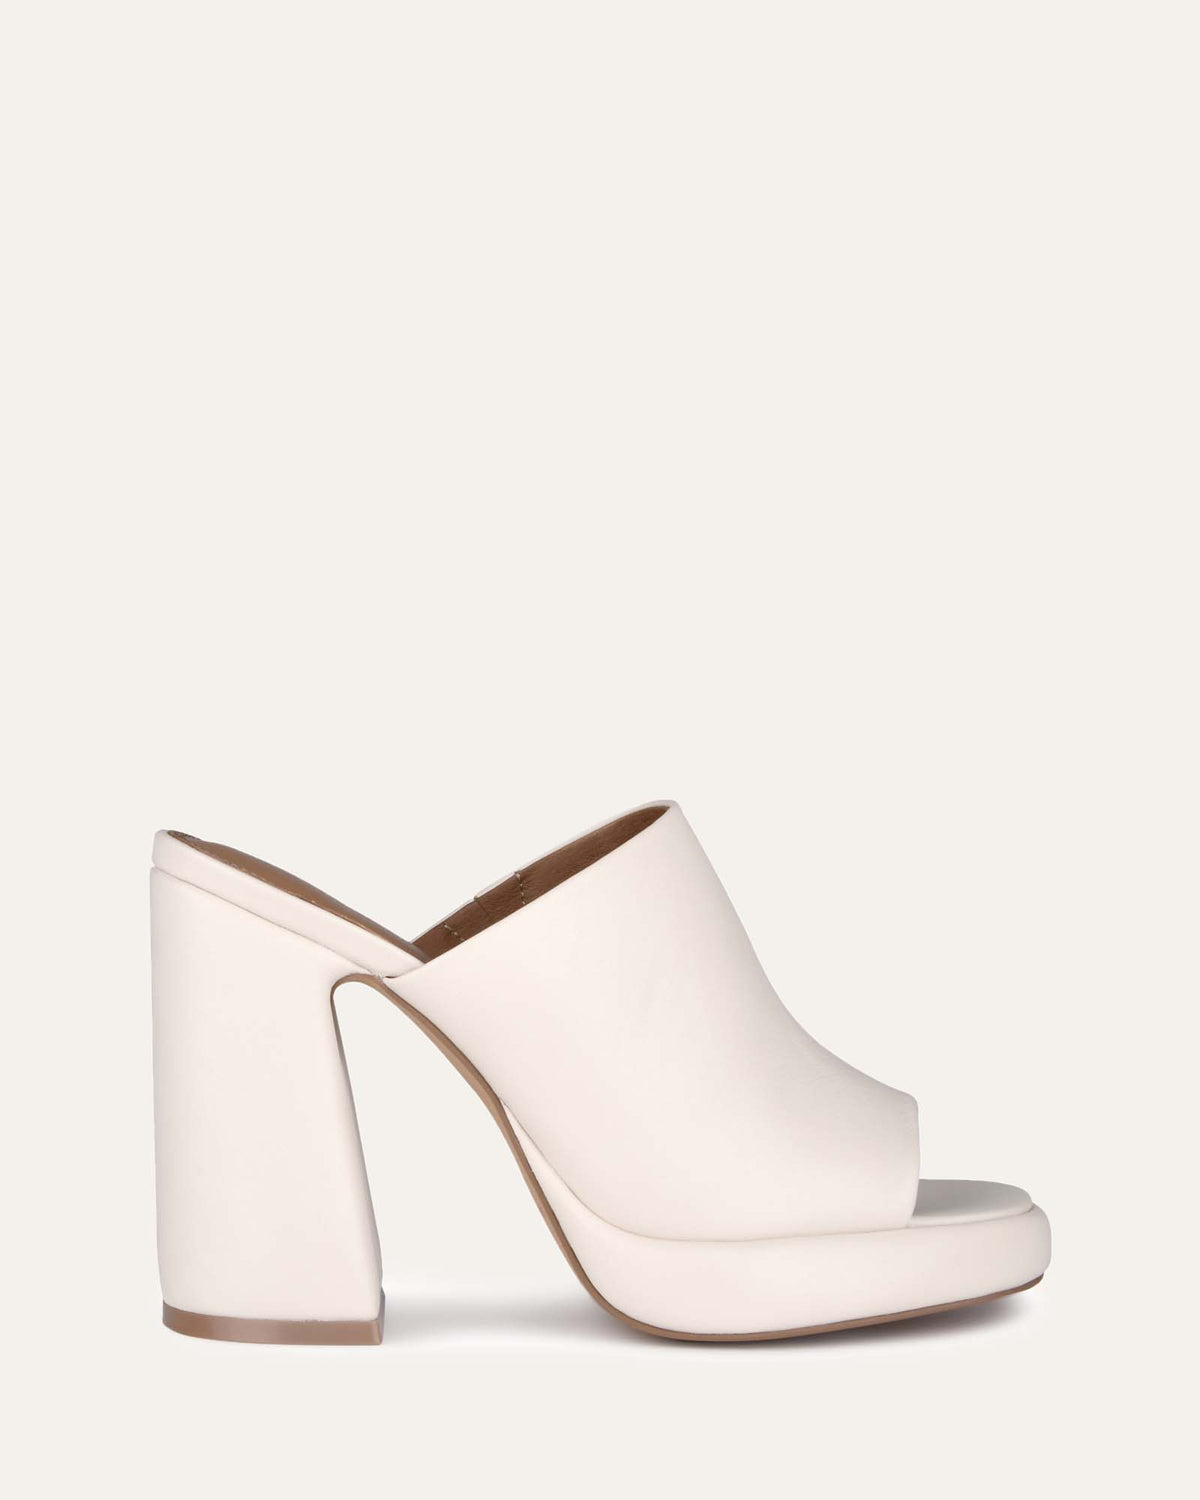 COSMO HIGH HEEL SANDALS OFF WHITE LEATHER